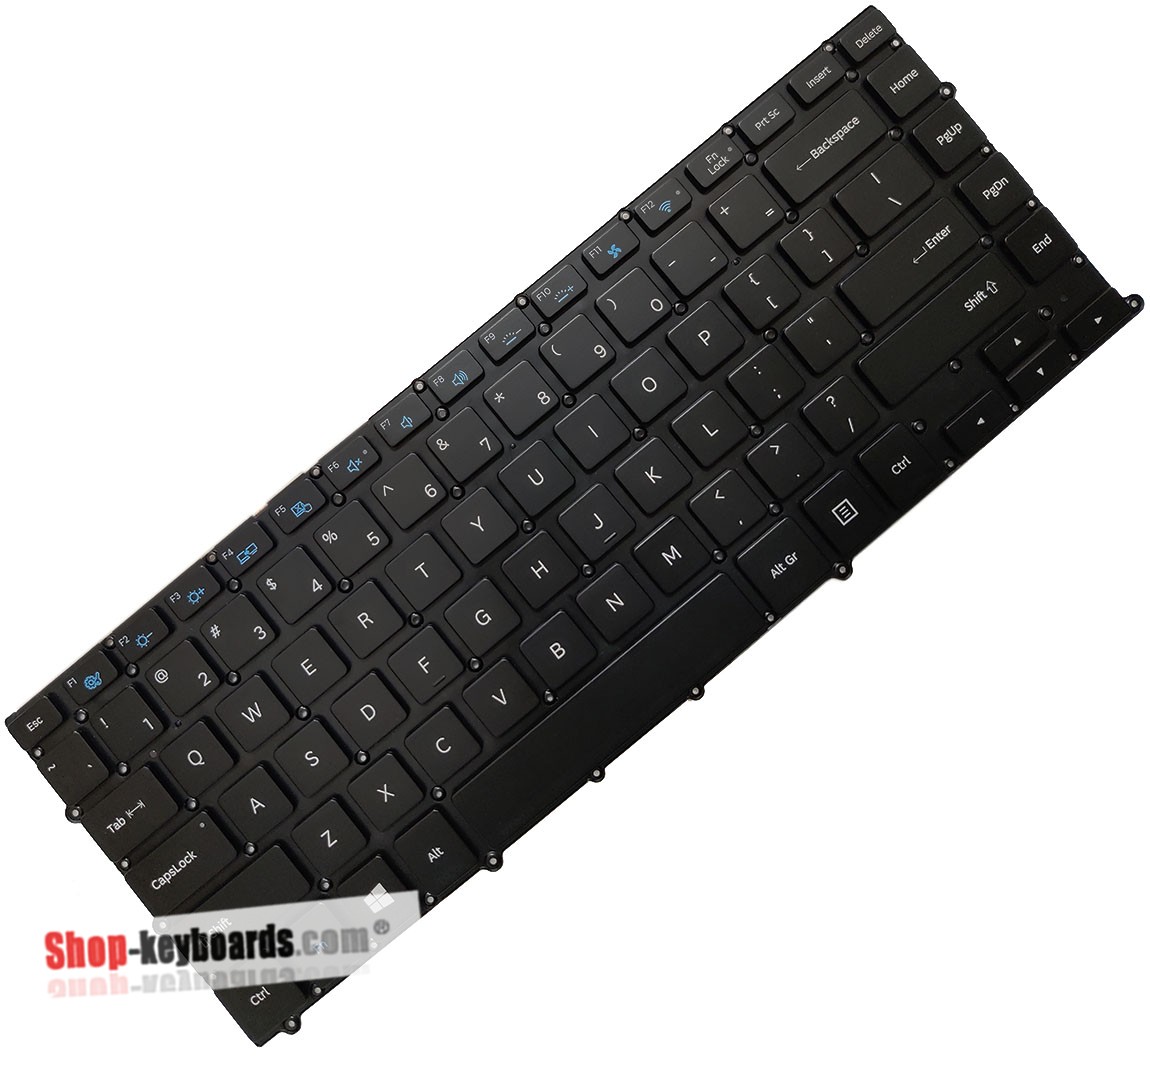 Samsung NP900X4B-A02US Keyboard replacement